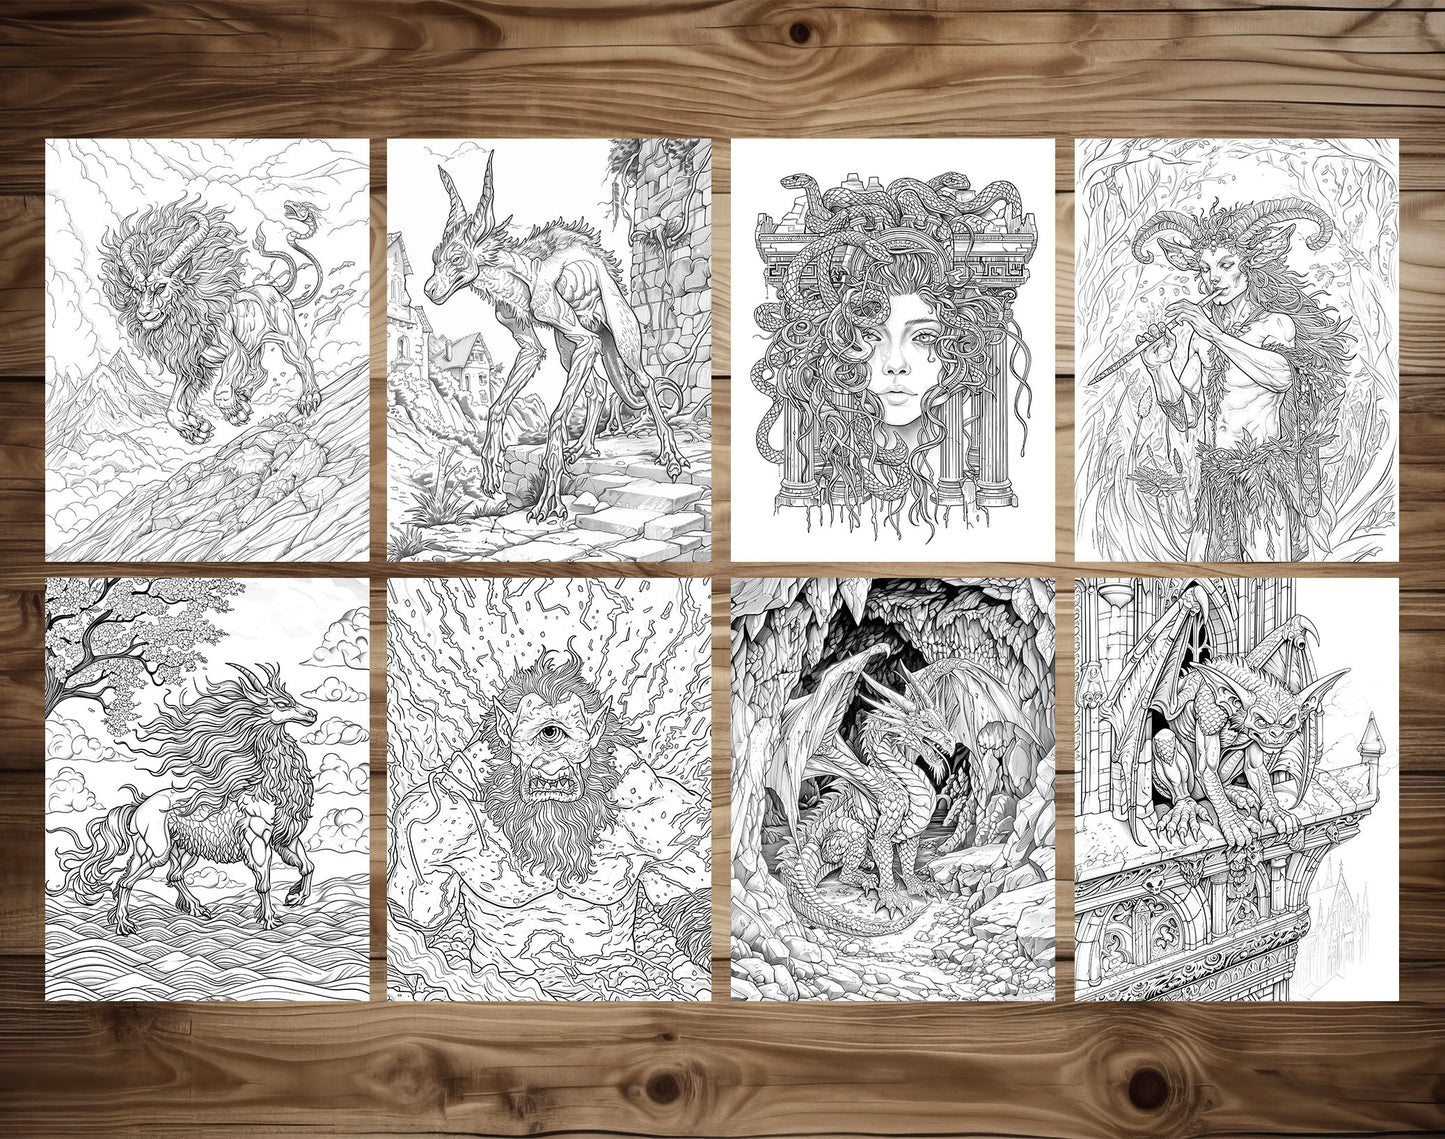 50 Mythical Creatures Coloring Pages - Instant Download - Printable PDF